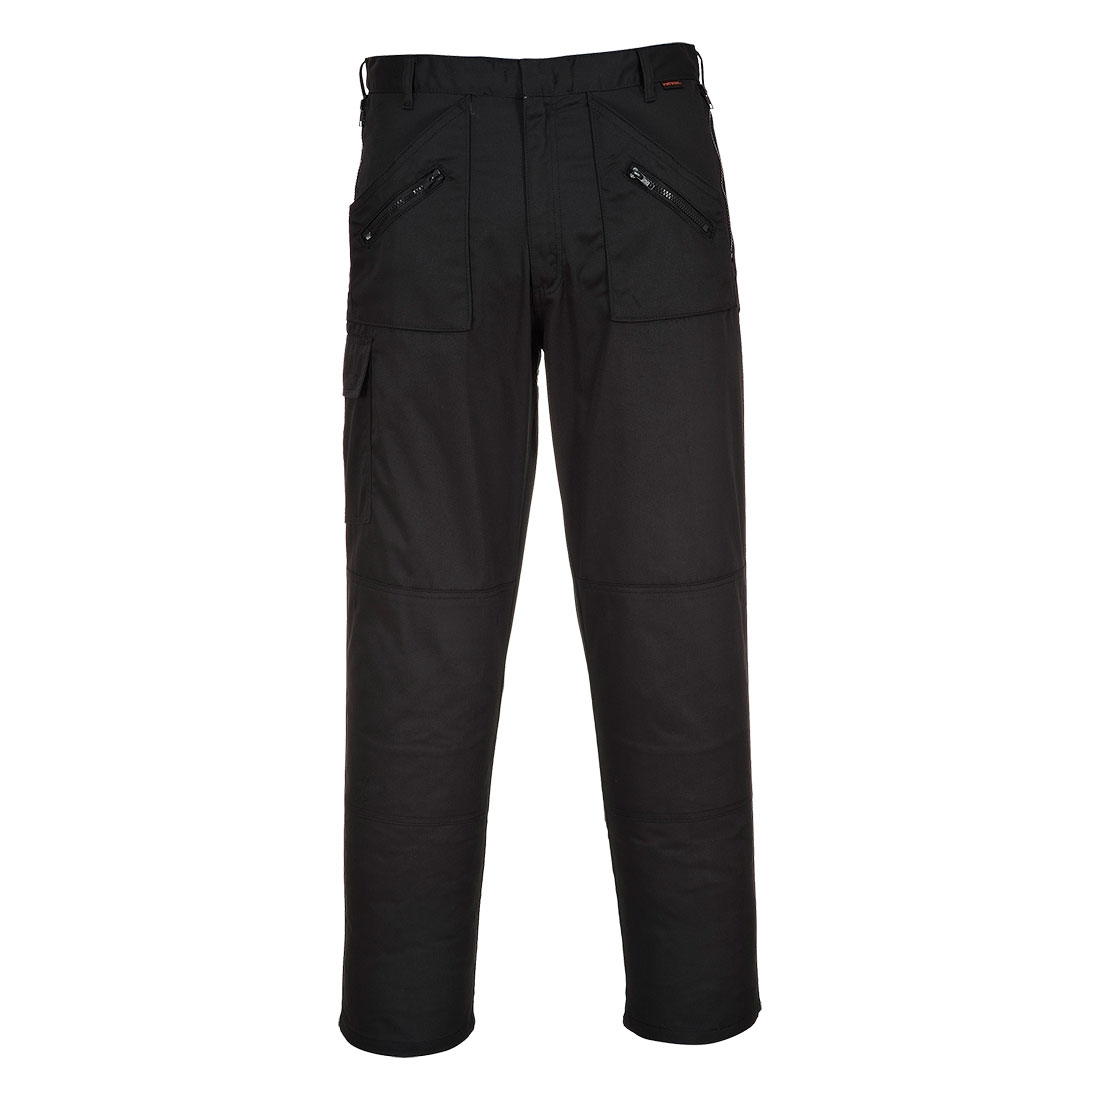 Action Trouser Black – 34 – Work Safety Protective Equipment – Portwest – Regus Supply